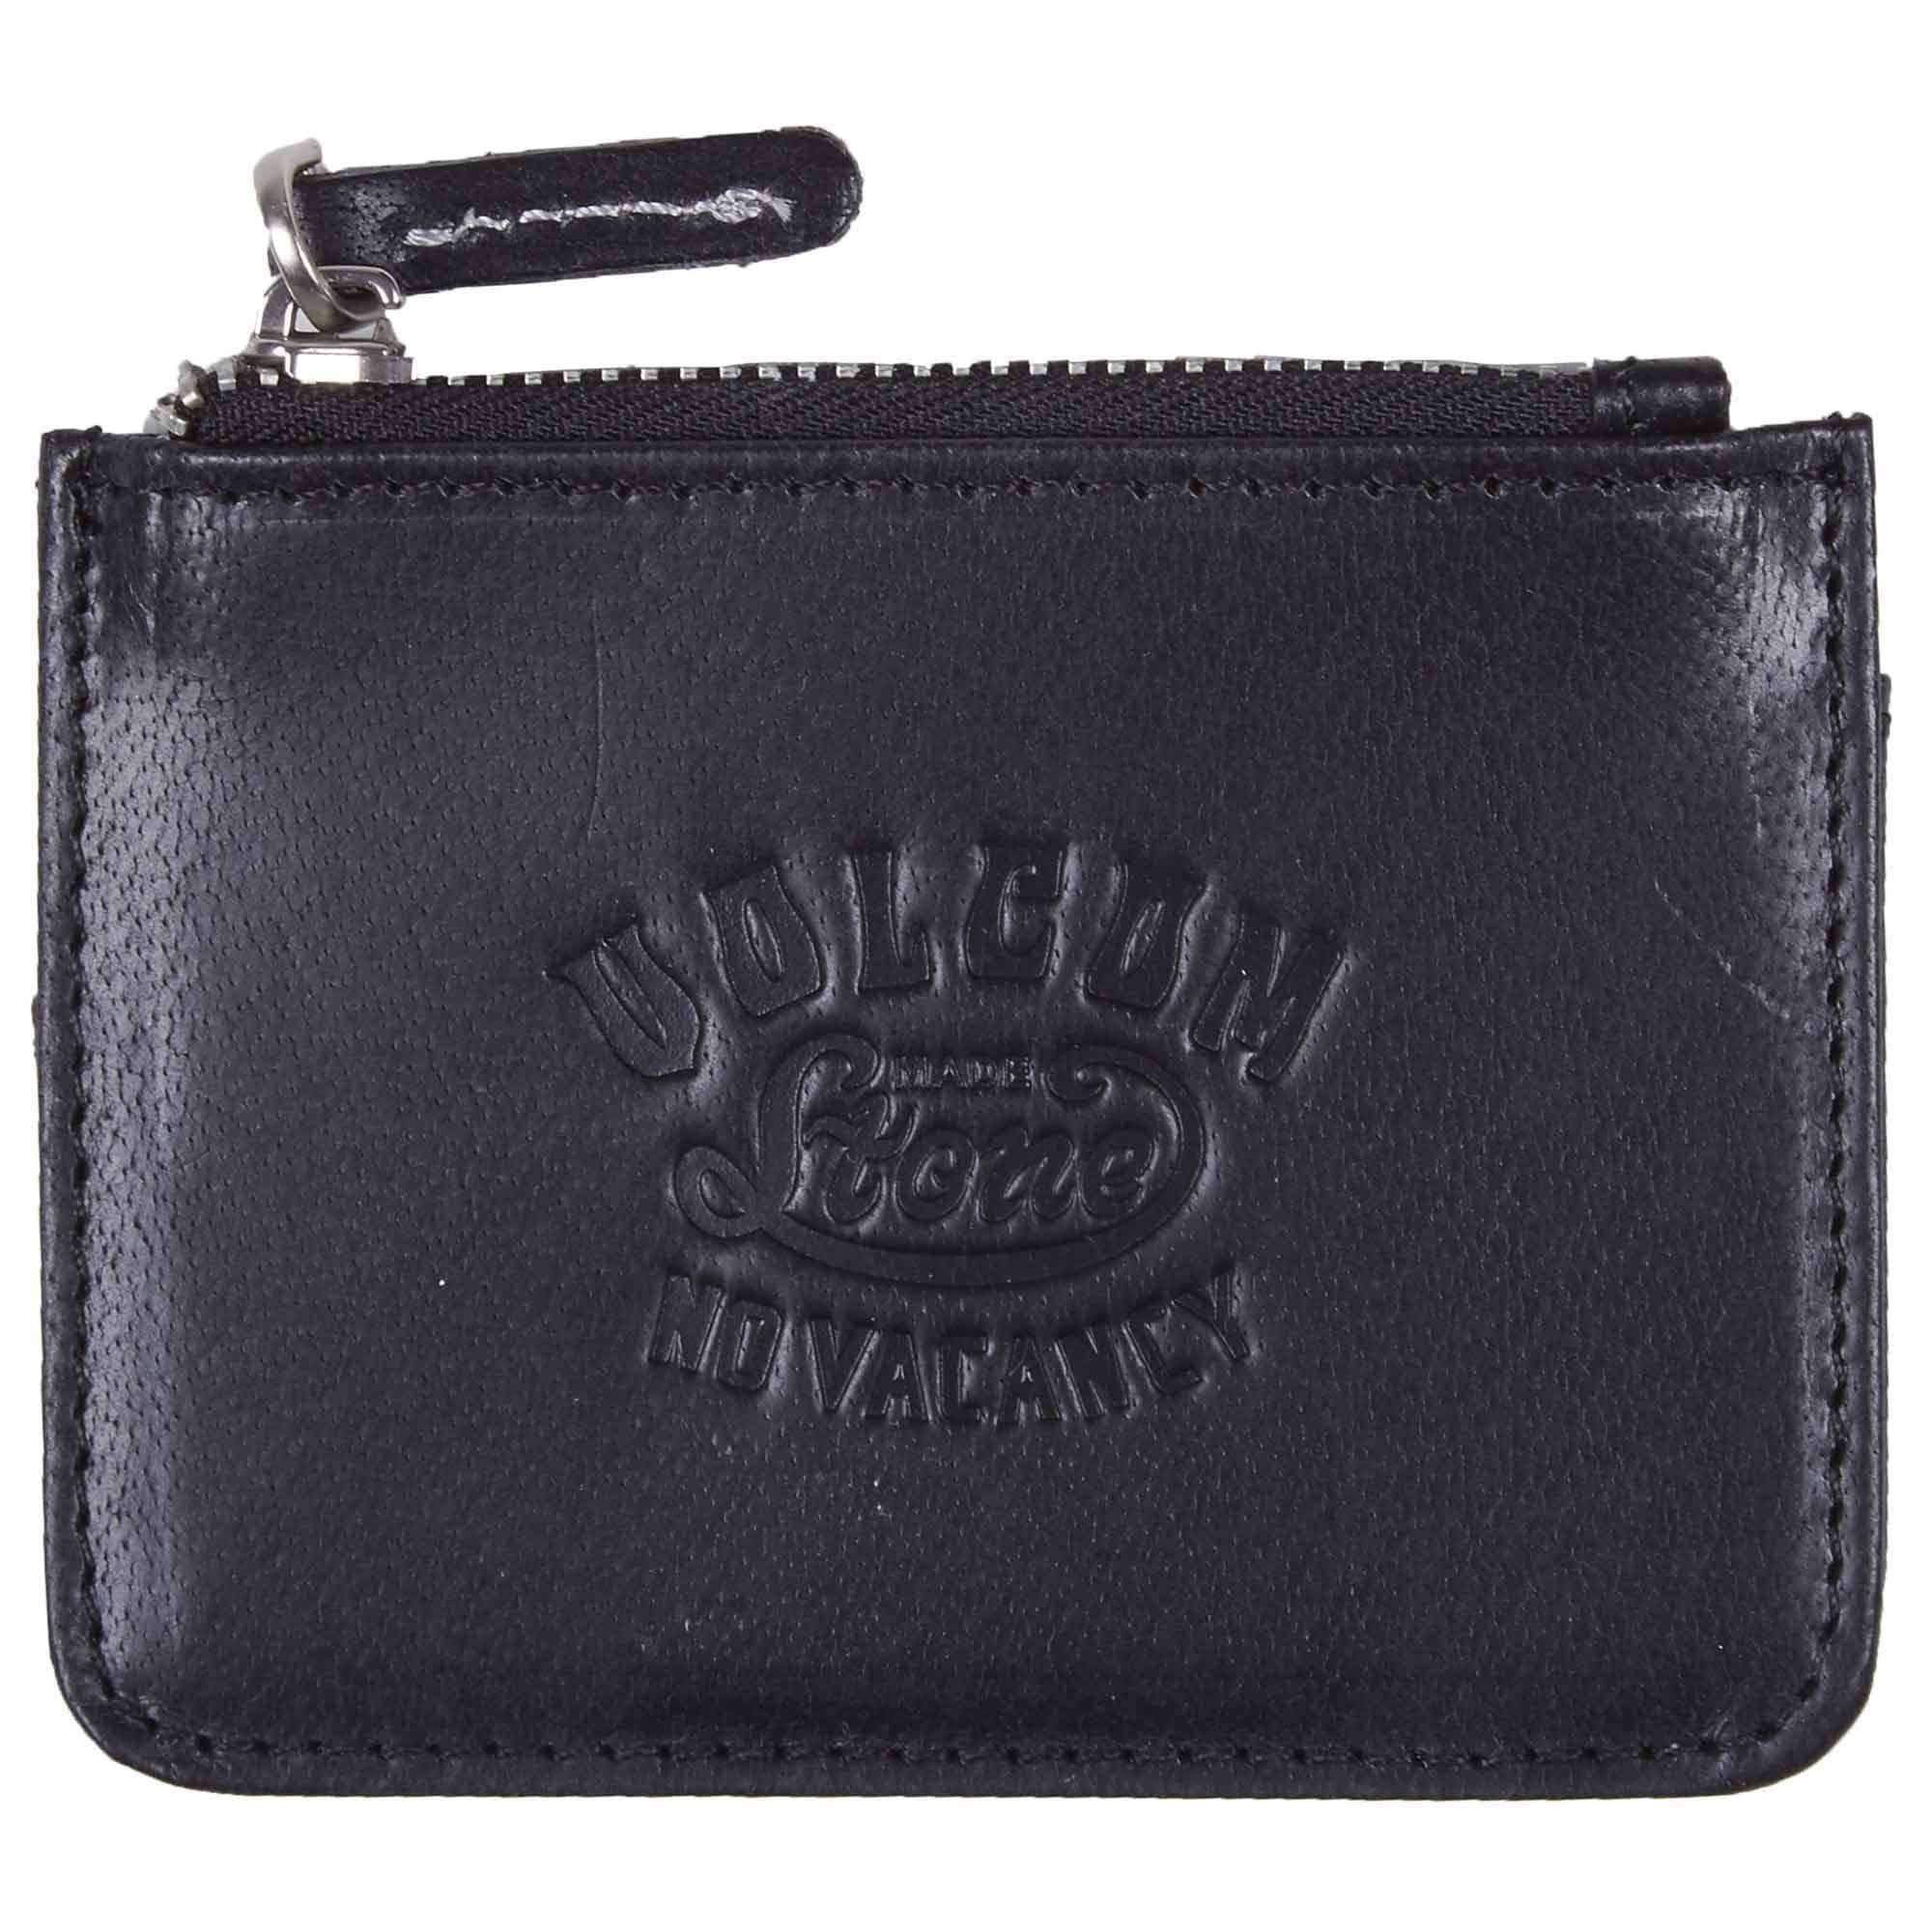 Volcom Stone Army Coin Wallet in Black Mens Wallet by Volcom